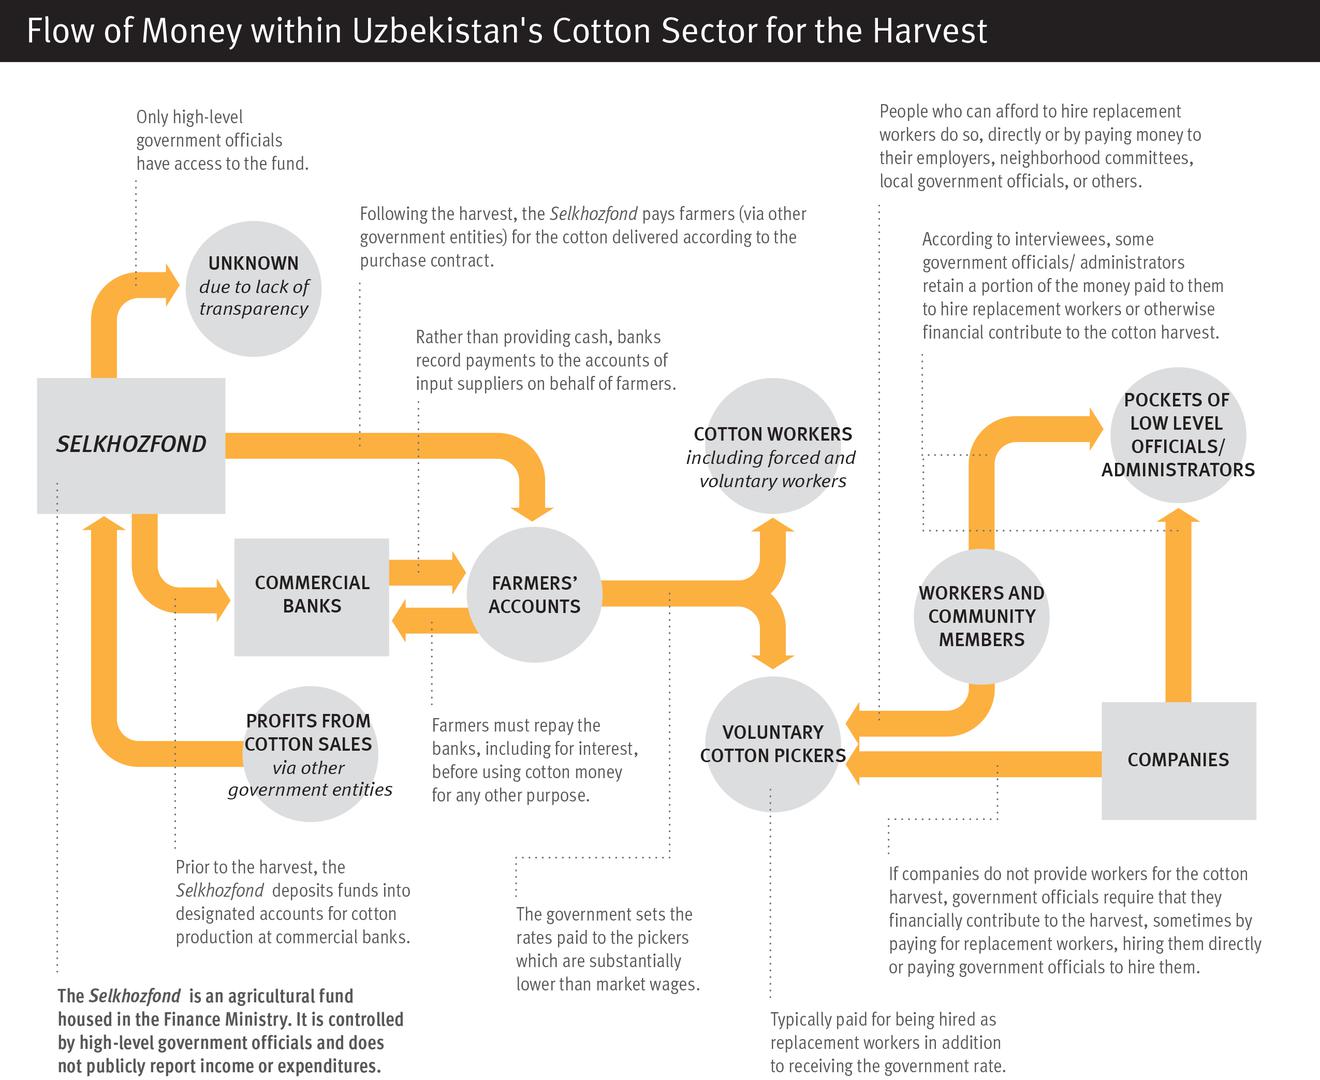 Graphic showing the flow of money within Uzbekistan's cotton sector for the harvest 